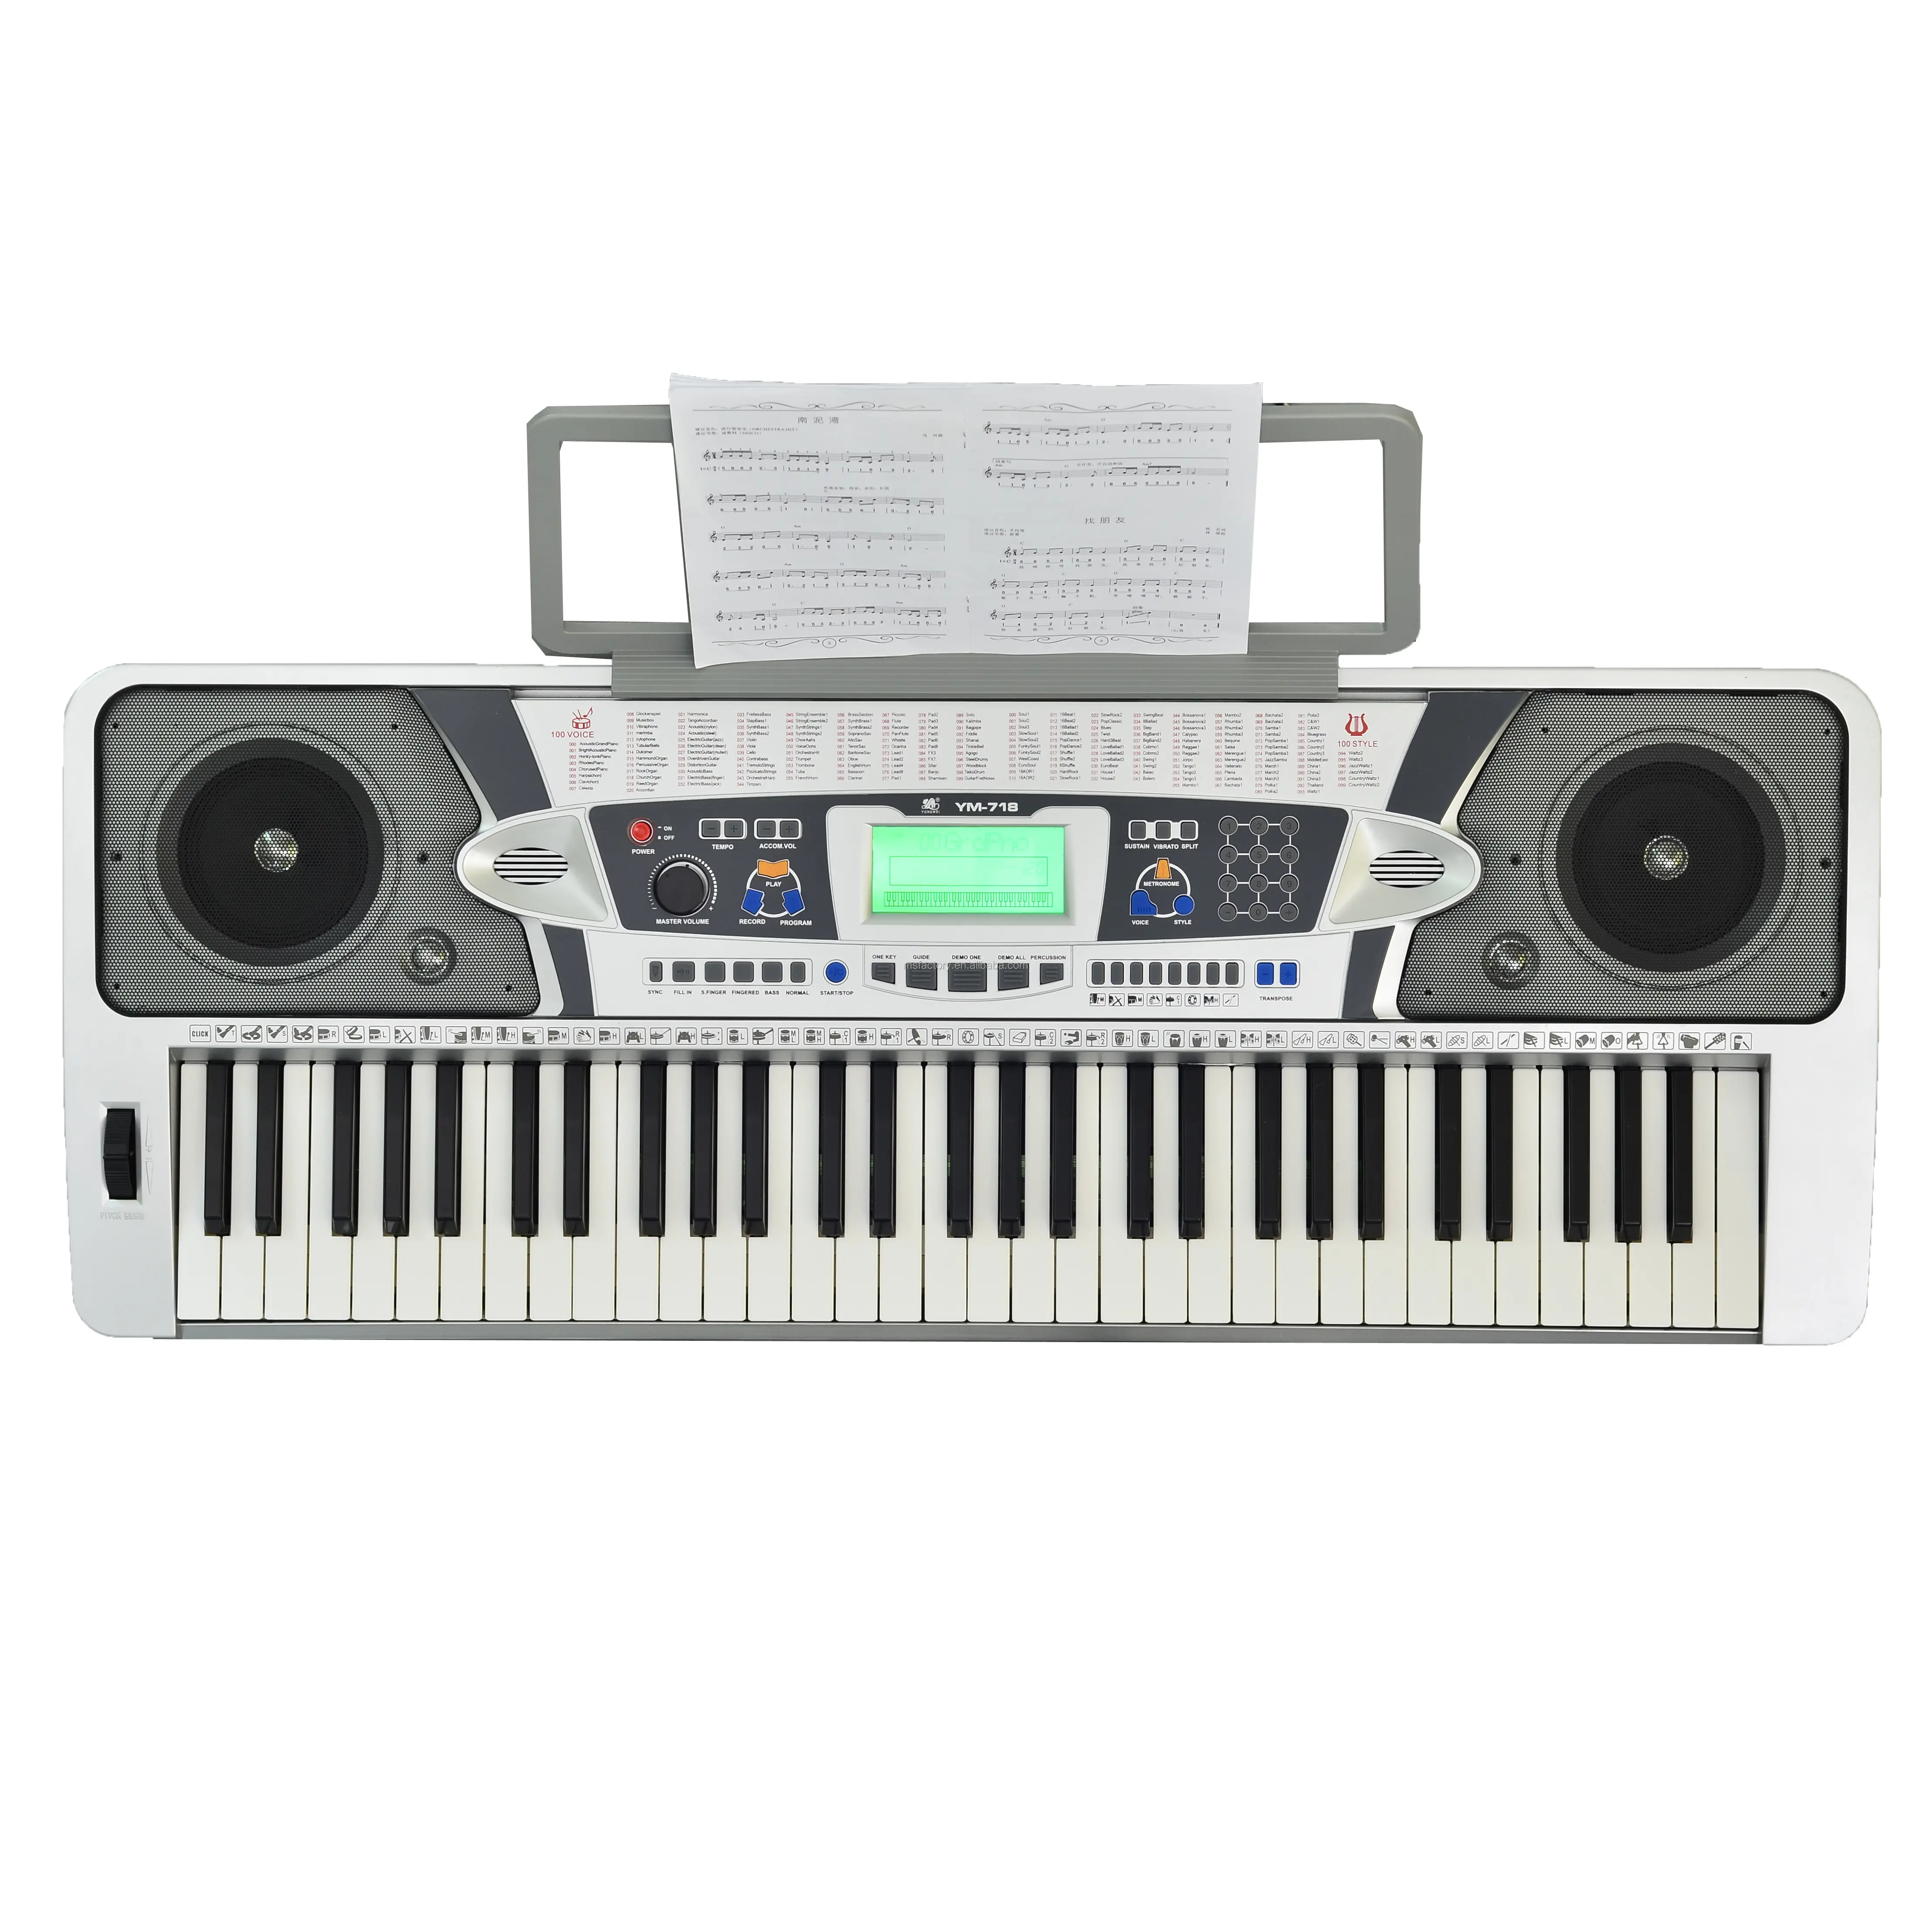 61 Keys Standard Touch Response Keyboard with Pitch Bender Wheel